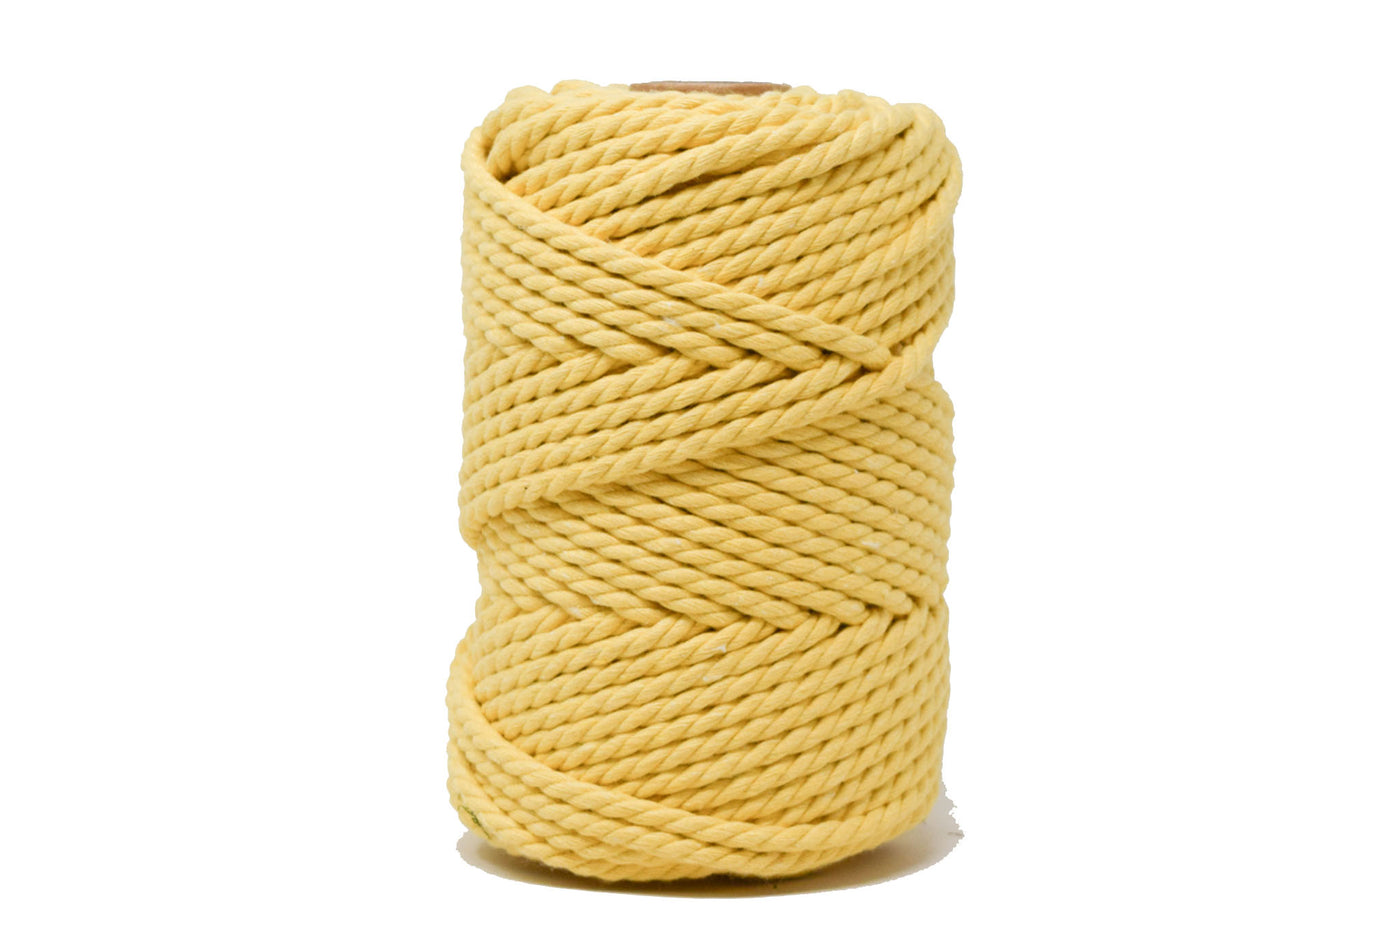 COTTON ROPE ZERO WASTE 5 MM - 3 PLY - SUNFLOWER YELLOW COLOR